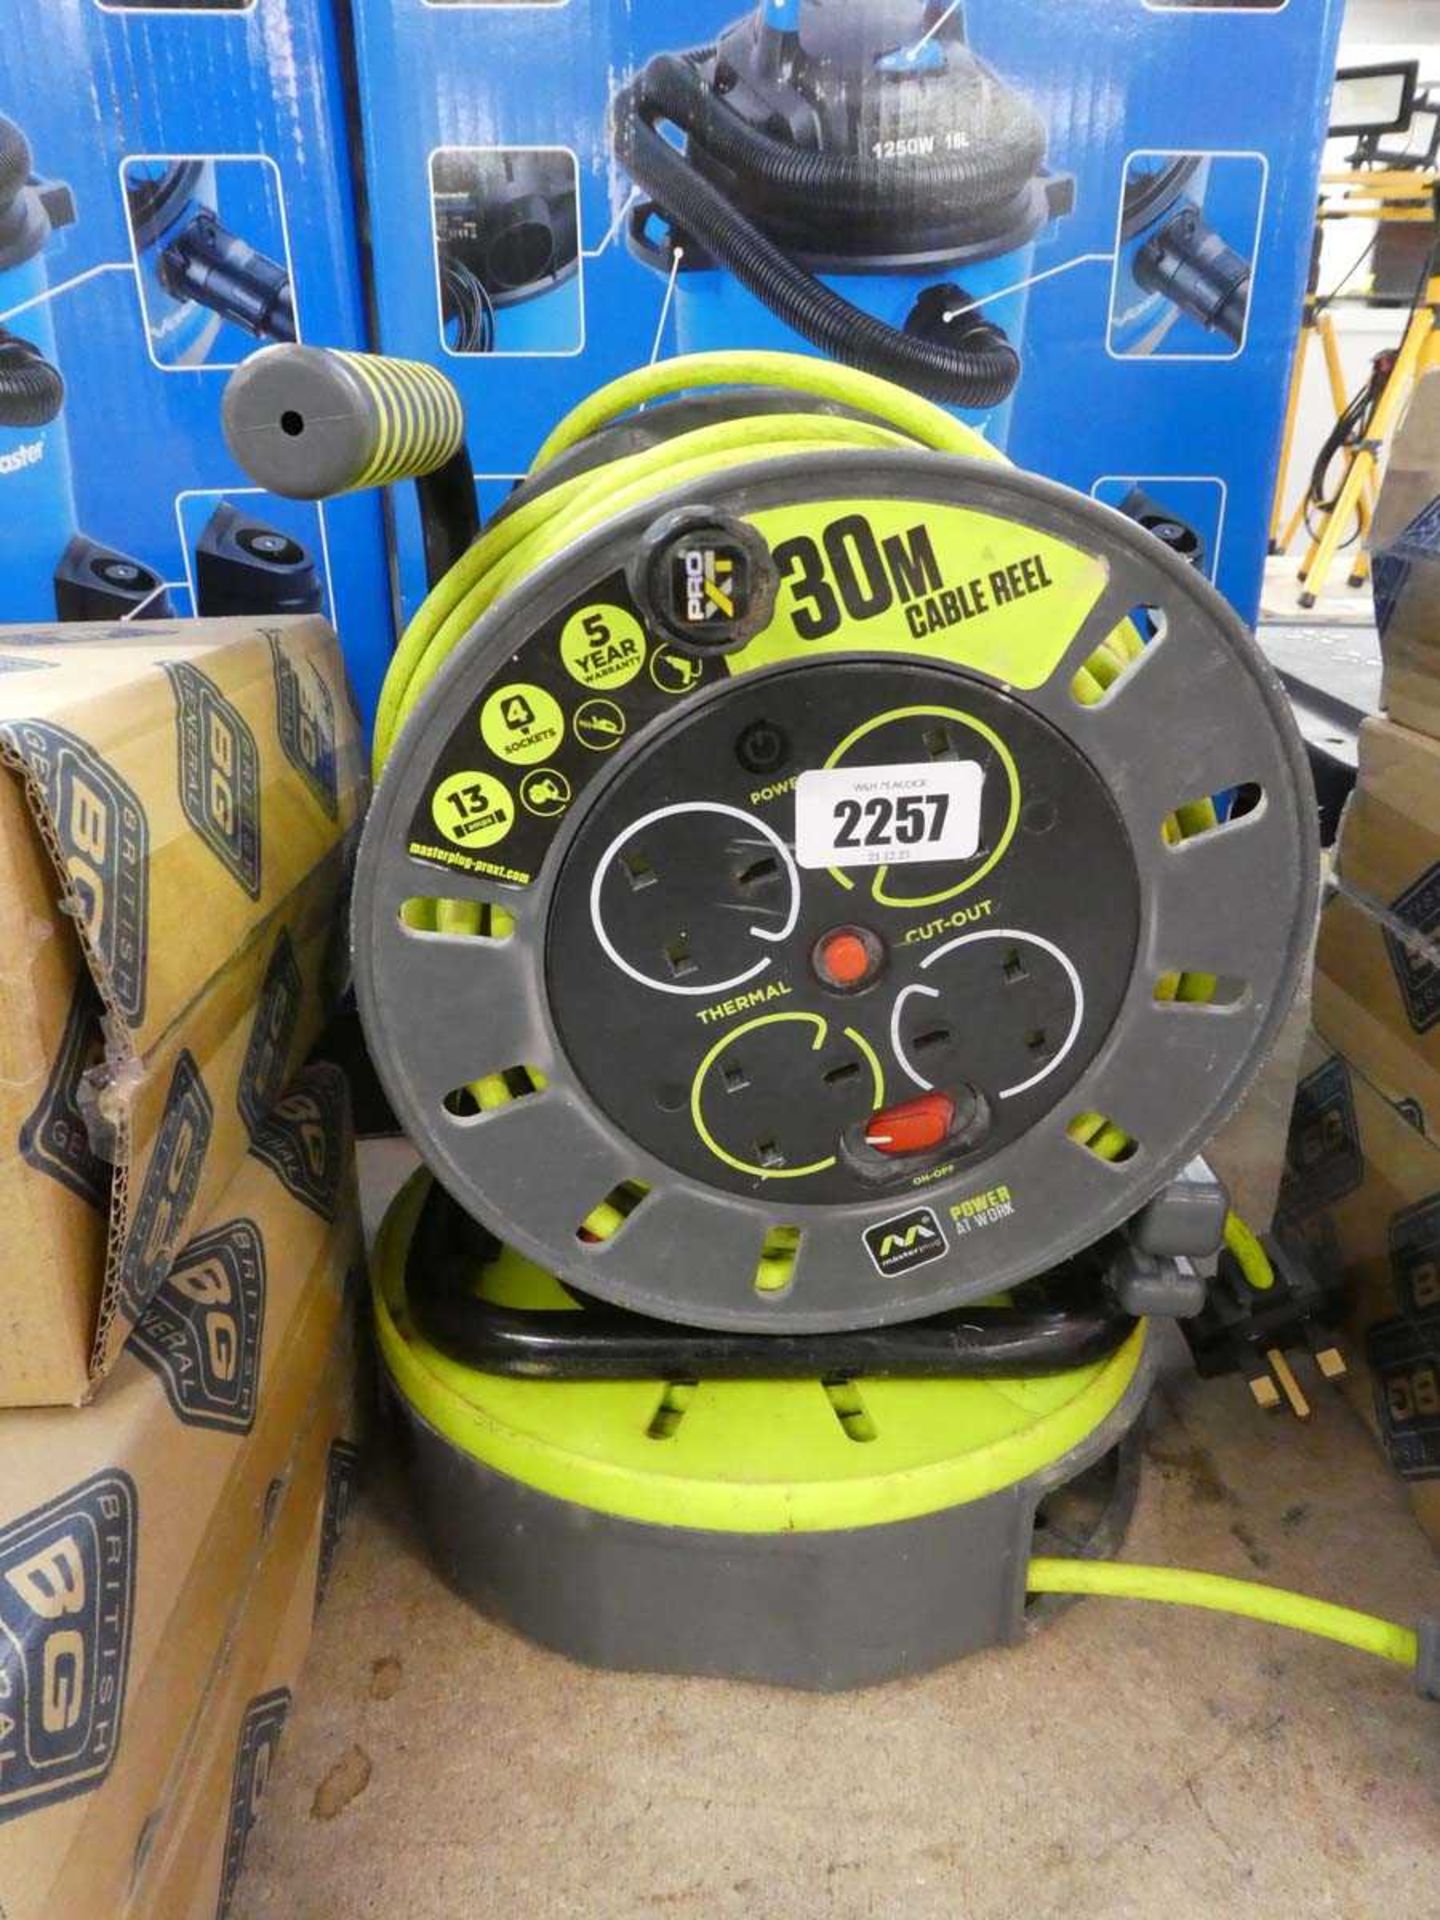 Masterplug 30m cable reel with Masterplug 10m cable reel